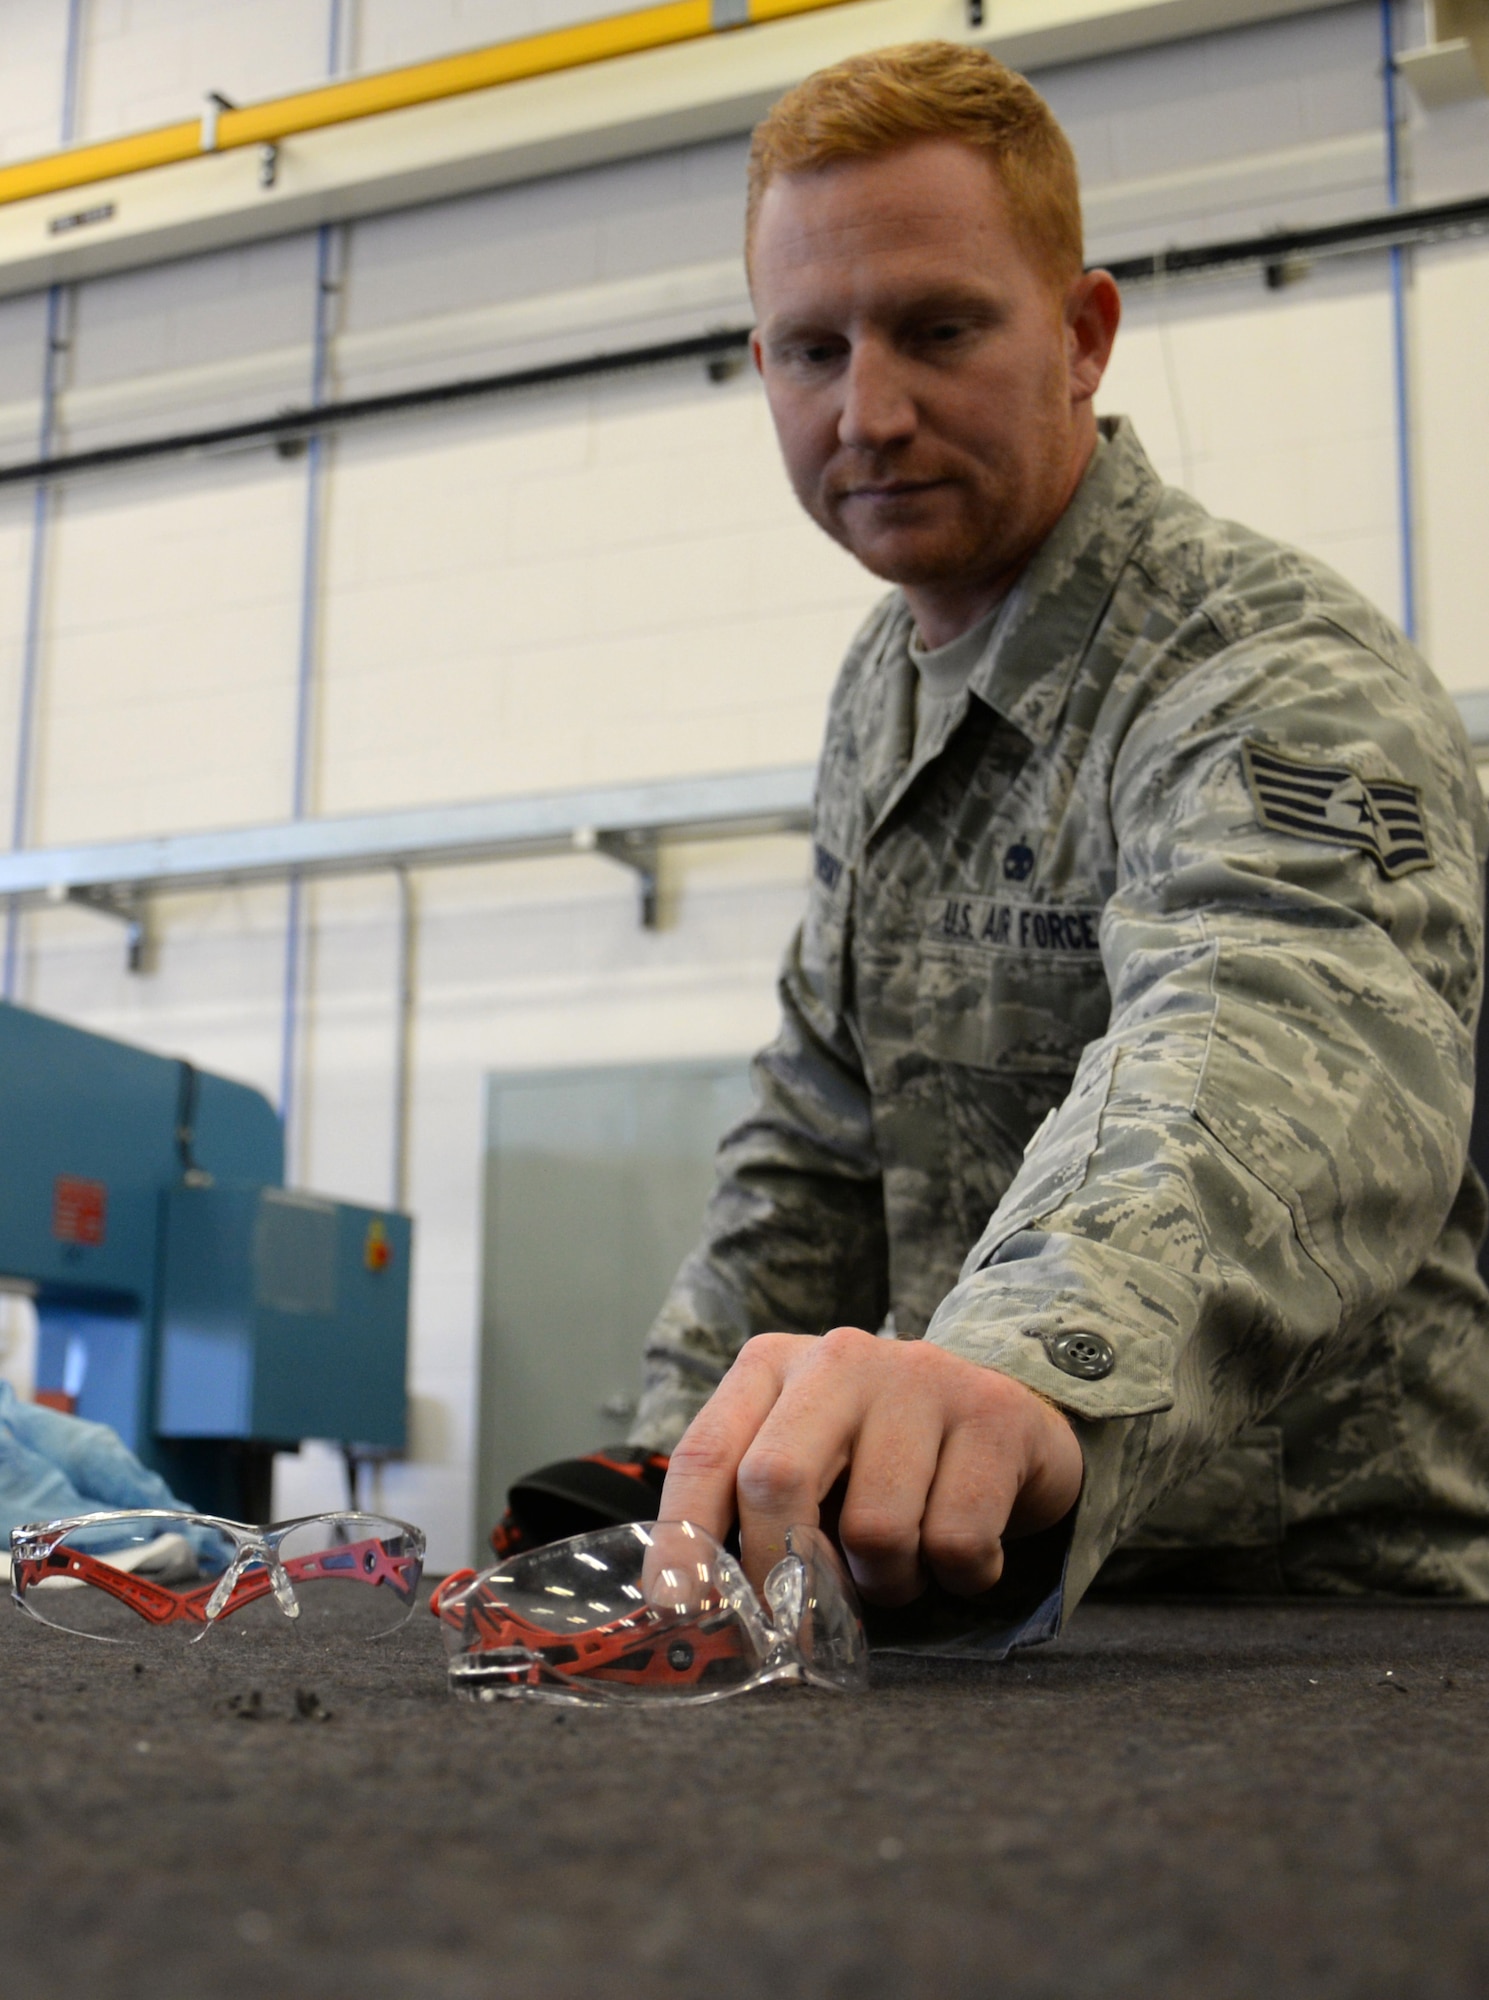 U.S. Air Force Staff Sgt. Zachary Sidlovsky, 100th Maintenance Squadron Aircraft Structural Maintenance craftsman, picks up safety glasses before carrying out his task Oct. 17, 2016, on RAF Mildenhall, England. Safety equipment is vital for maintainers as they carry out their duties. (U.S. Air Force photo by Gina Randall)